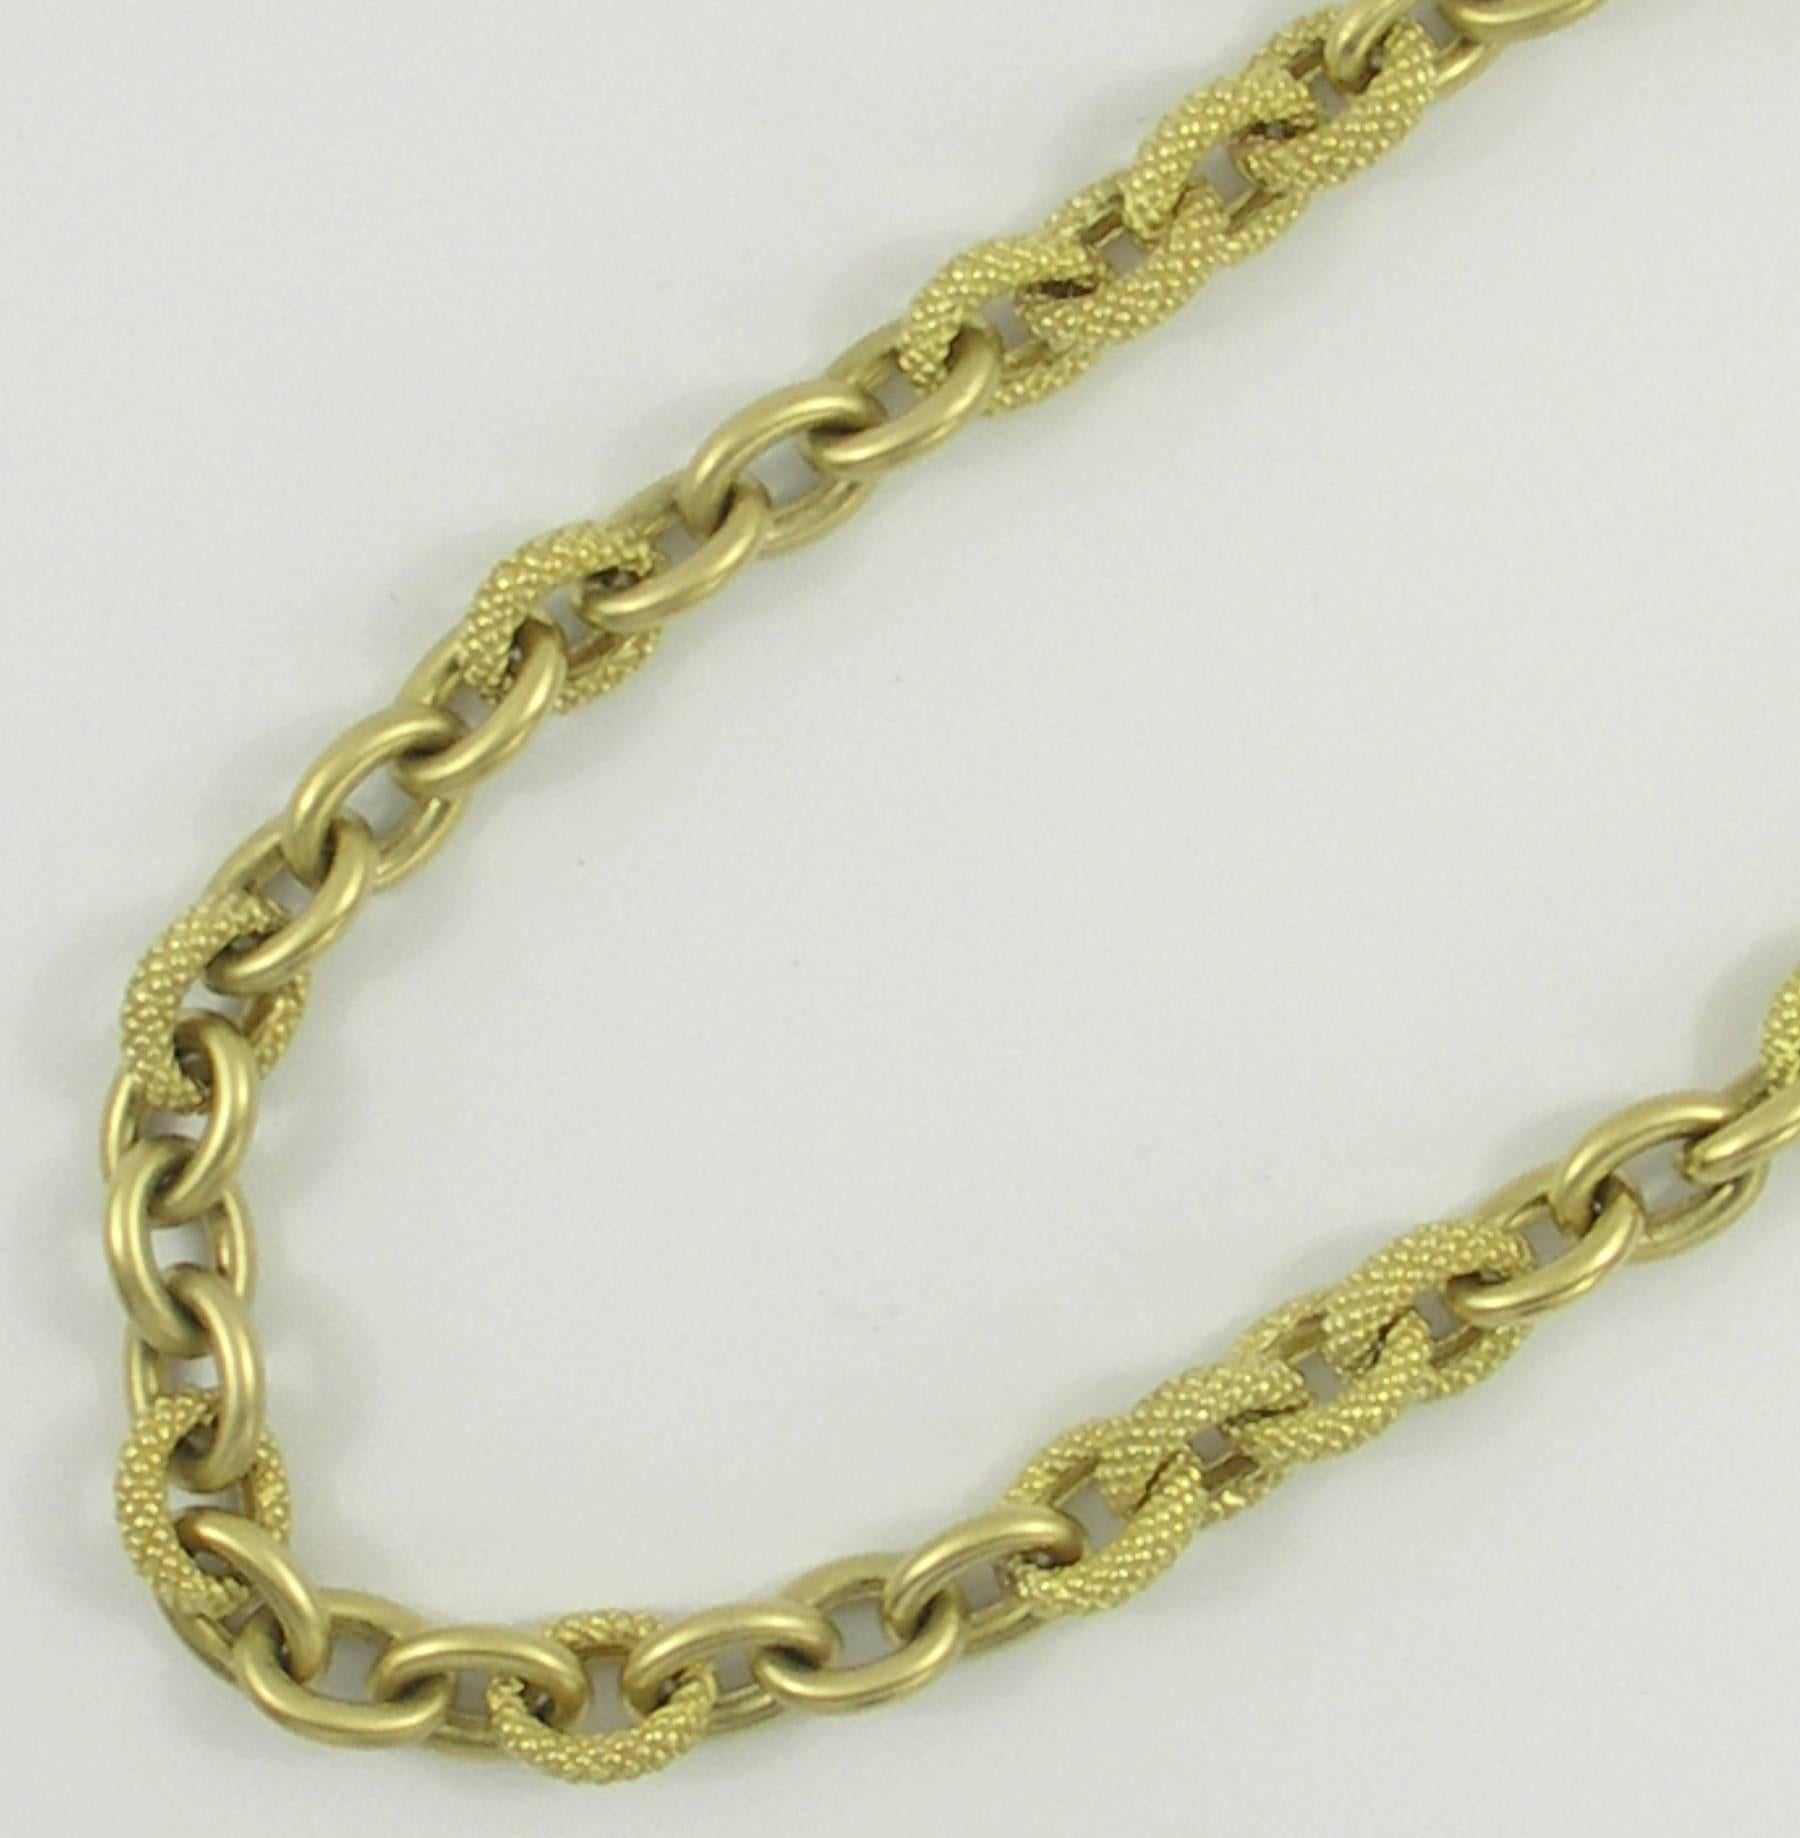 An 18K yellow gold necklace, with a design of alternating sections of 3 links per section, with sections alternating between a texture finish, and a satin finish. Each link measures 10mm in width, and the necklace features two signature